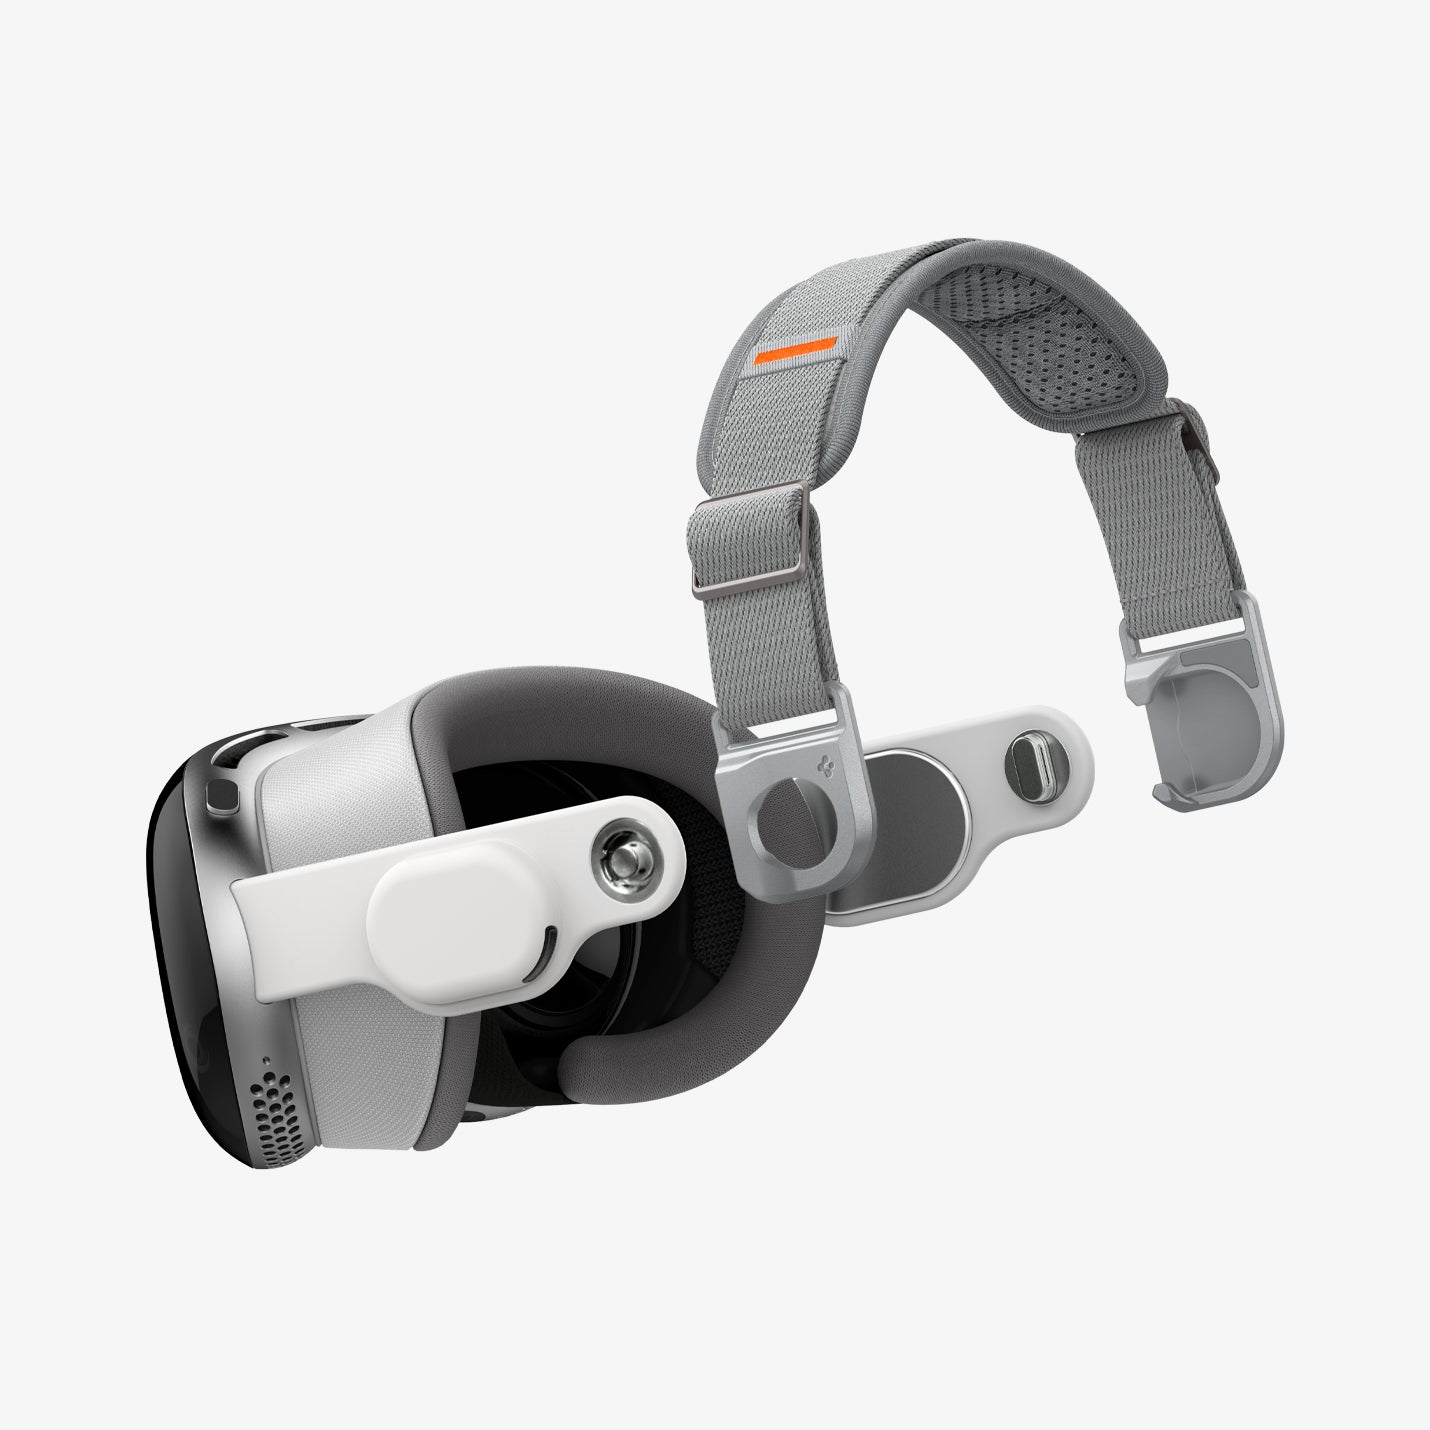 AFA07255 - Apple Vision Pro Head Strap in Charcoal Gray showing the detached front, partial side and inner of the head strap and the device